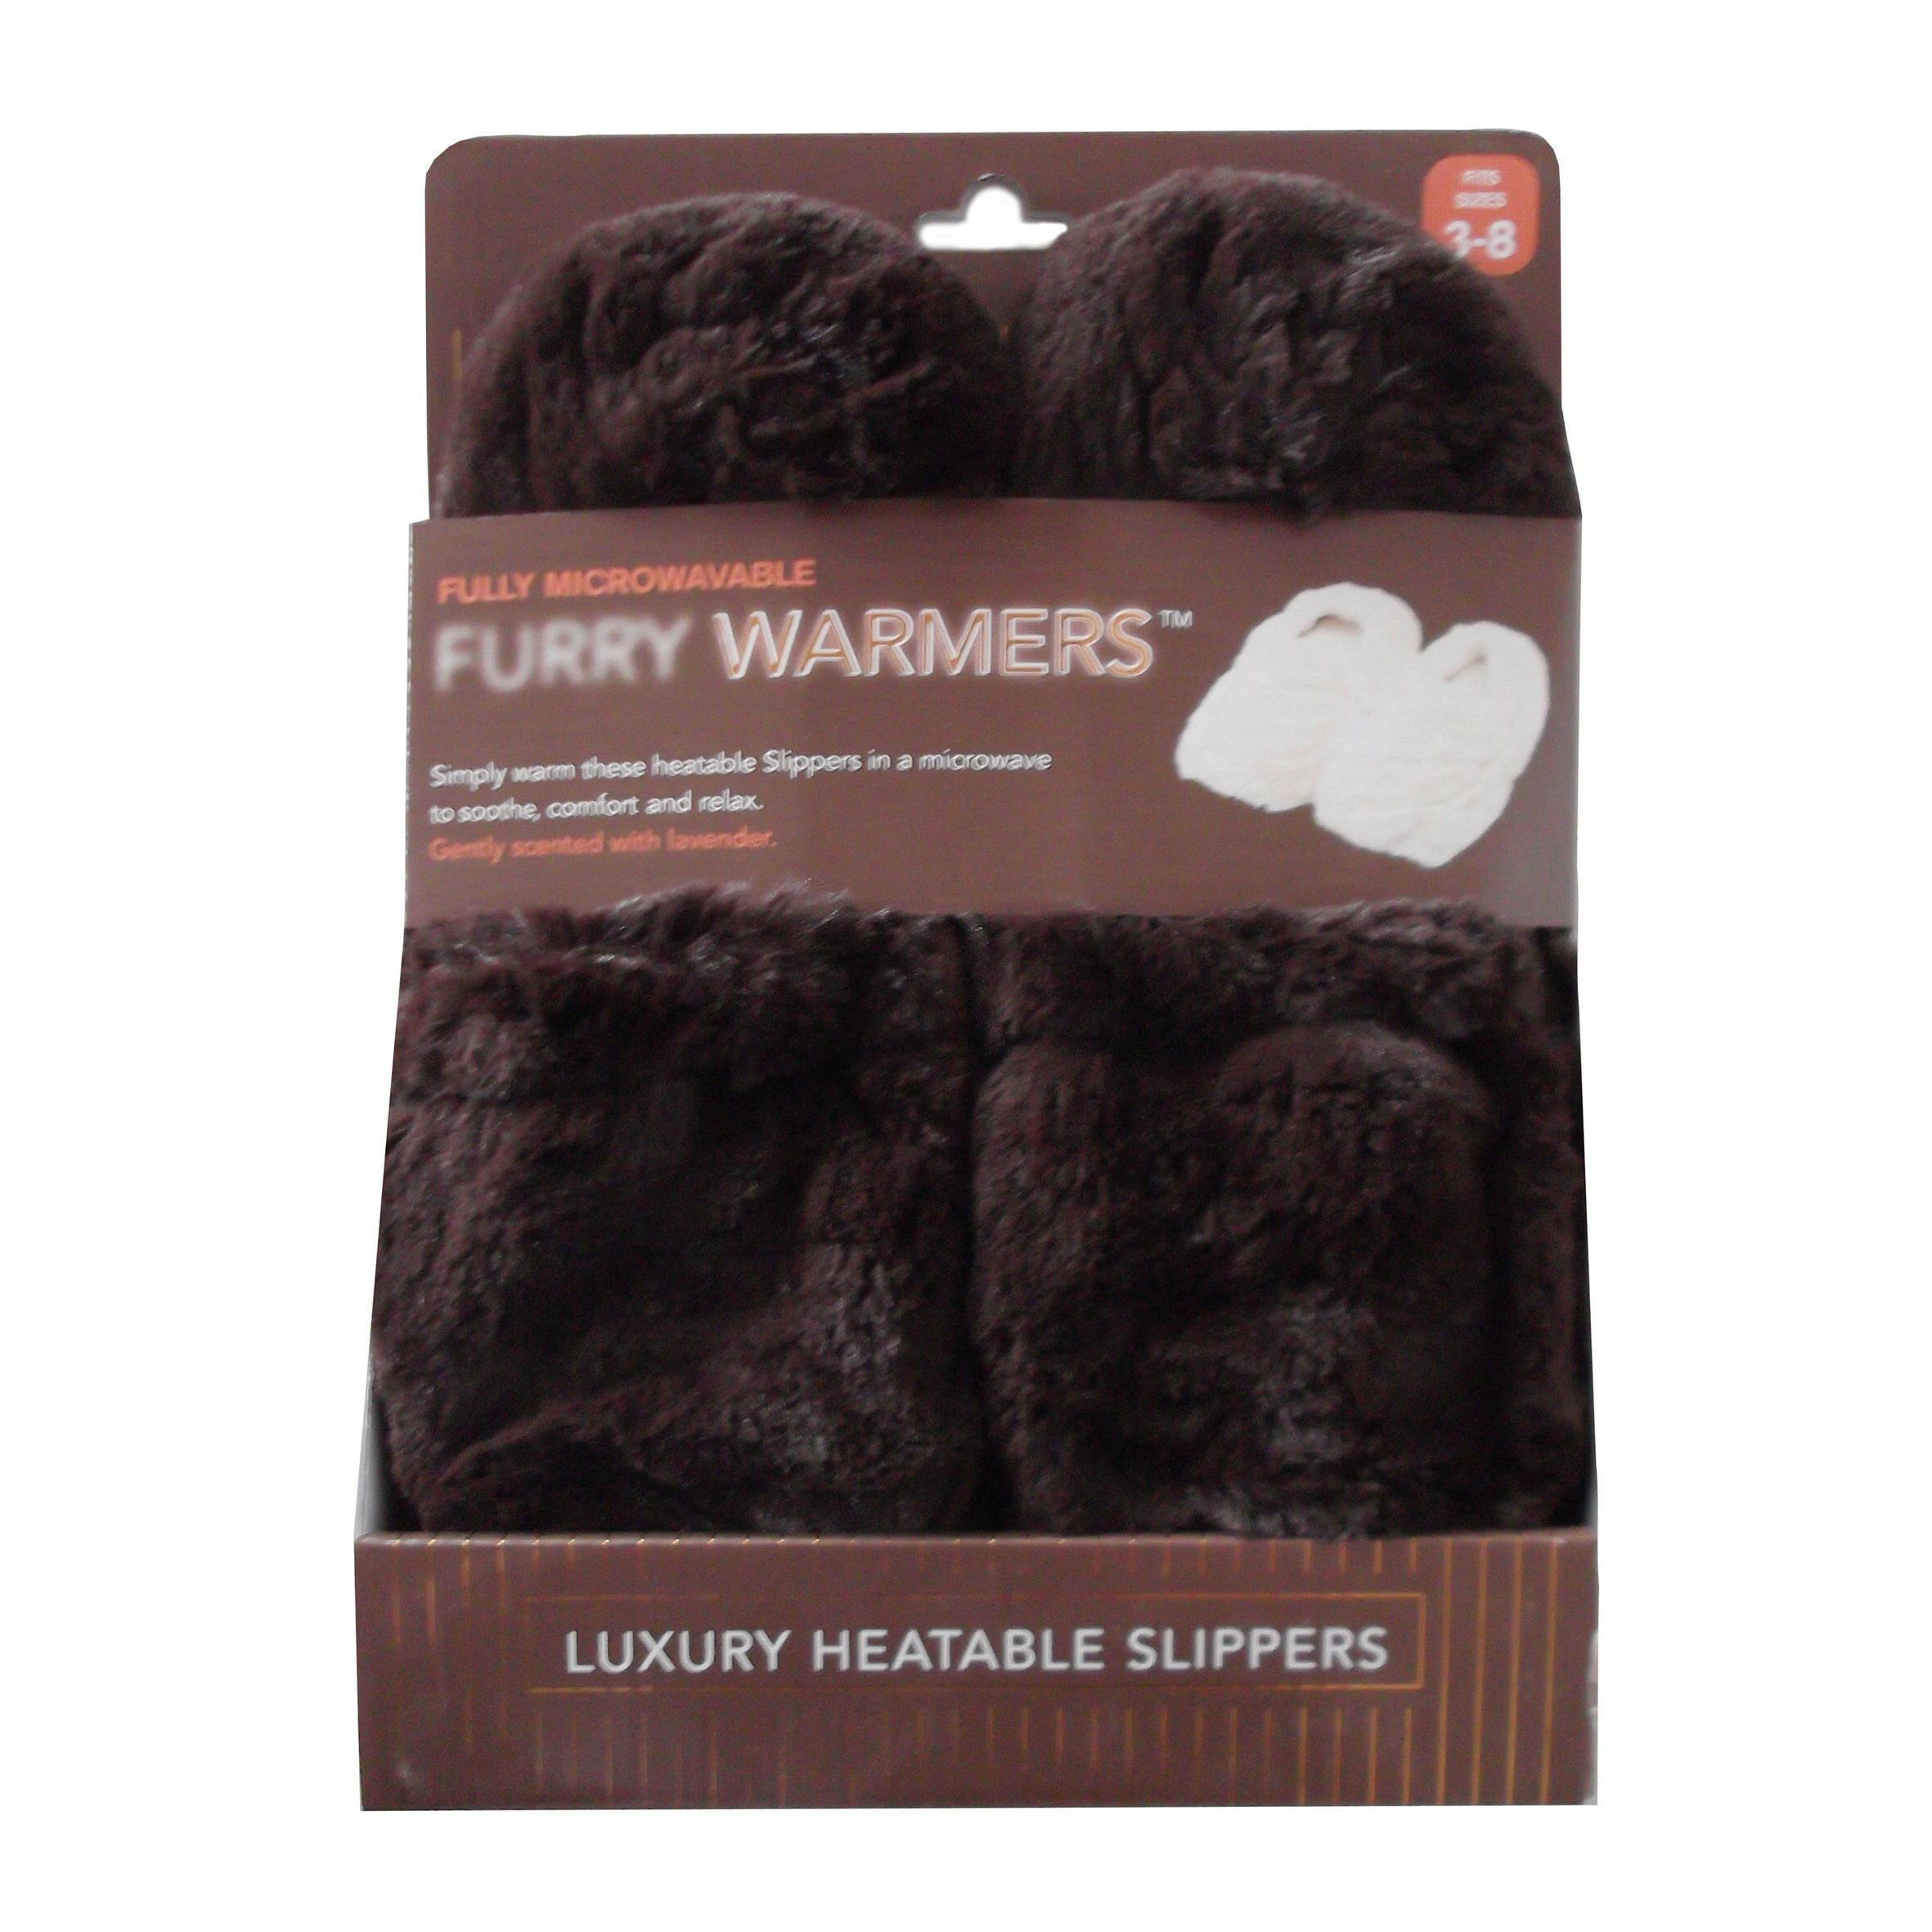 Furry Warmers Fully Microwavable Furry Slippers